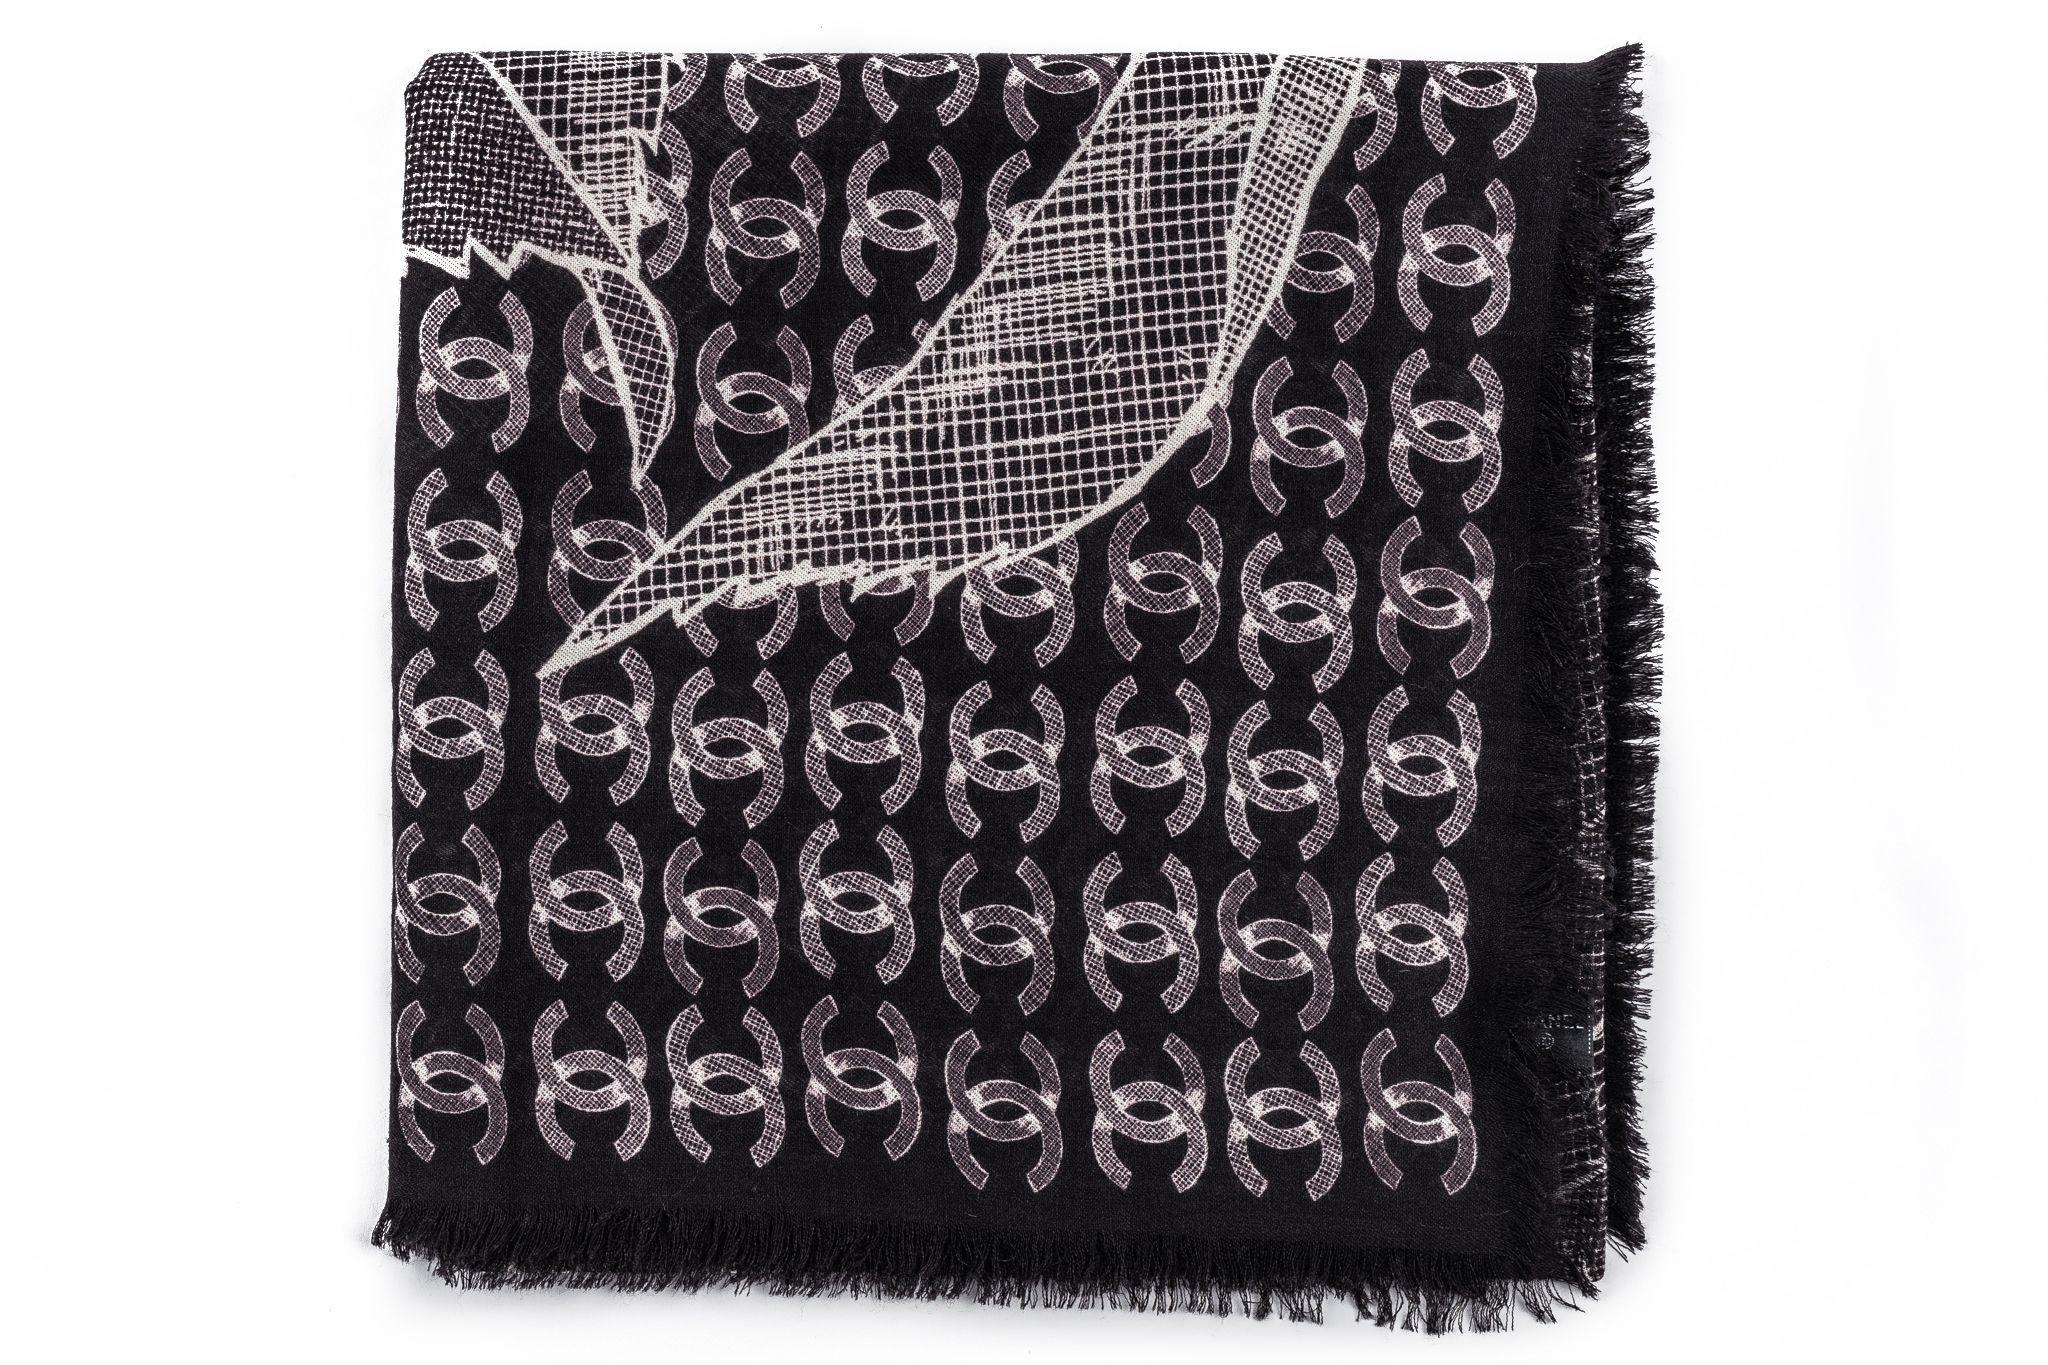 Chanel new Cashmere Shawl in black and white. The pattern features a big Chanel camellia which is surrounded by multiple CC logos. The item is in excellent condition.